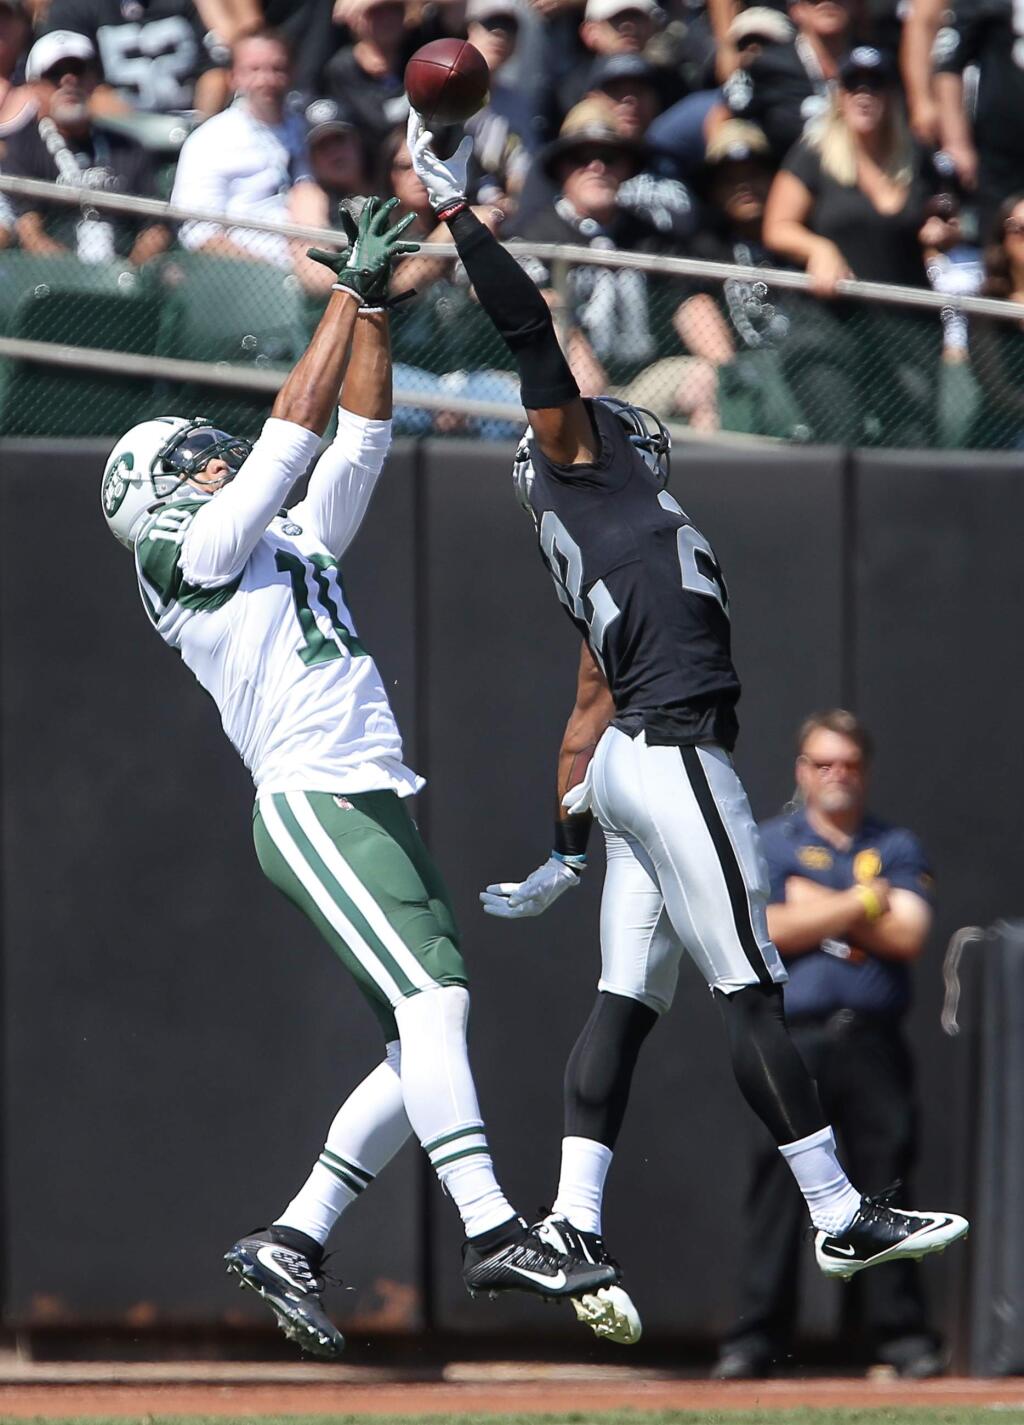 Oakland Raiders cornerback Gareon Conley bats away a pass intended for New York Jets wide receiver Jermaine Kearse, during their game in Oakland on Sunday, September 17, 2017. (Christopher Chung/ The Press Democrat)